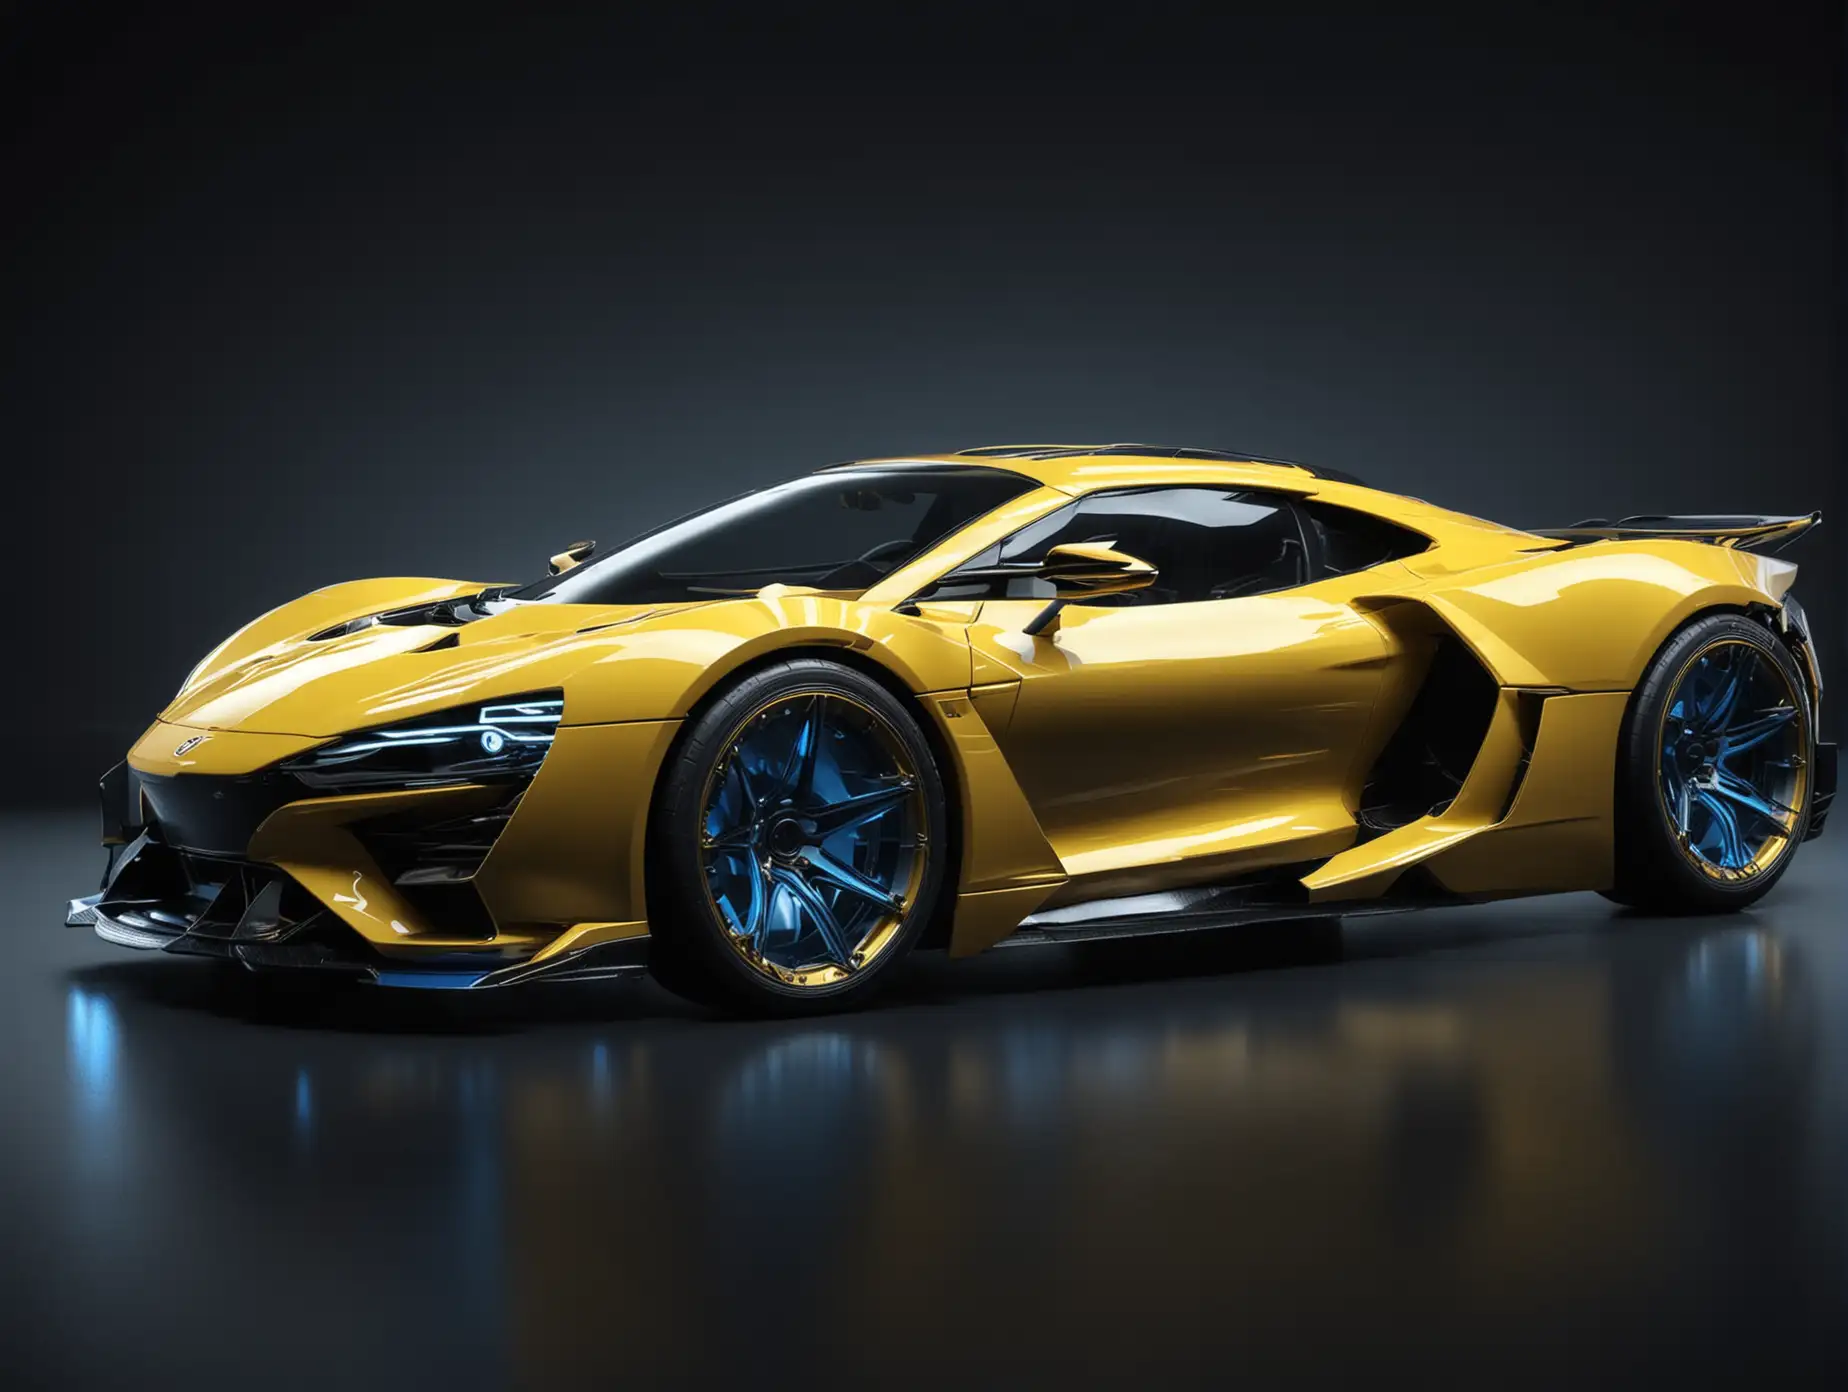 Futuristic Yellow Sports Car Side View with Blue Underglow on Black Background